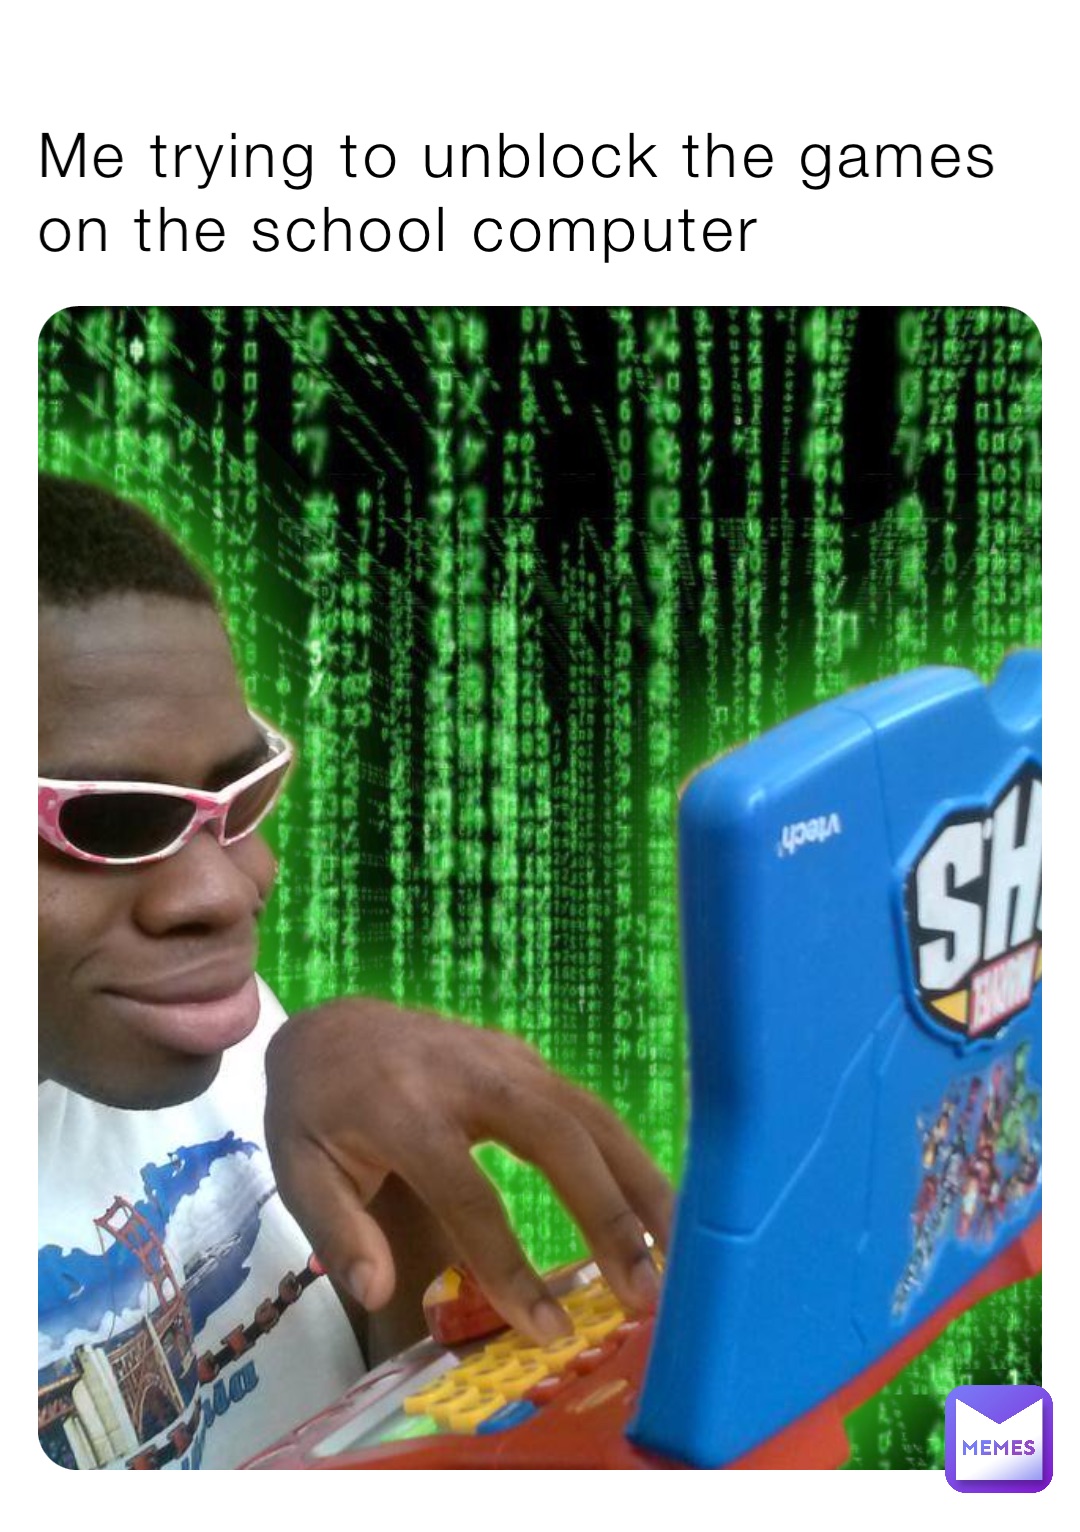 Me trying to unblock the games on the school computer